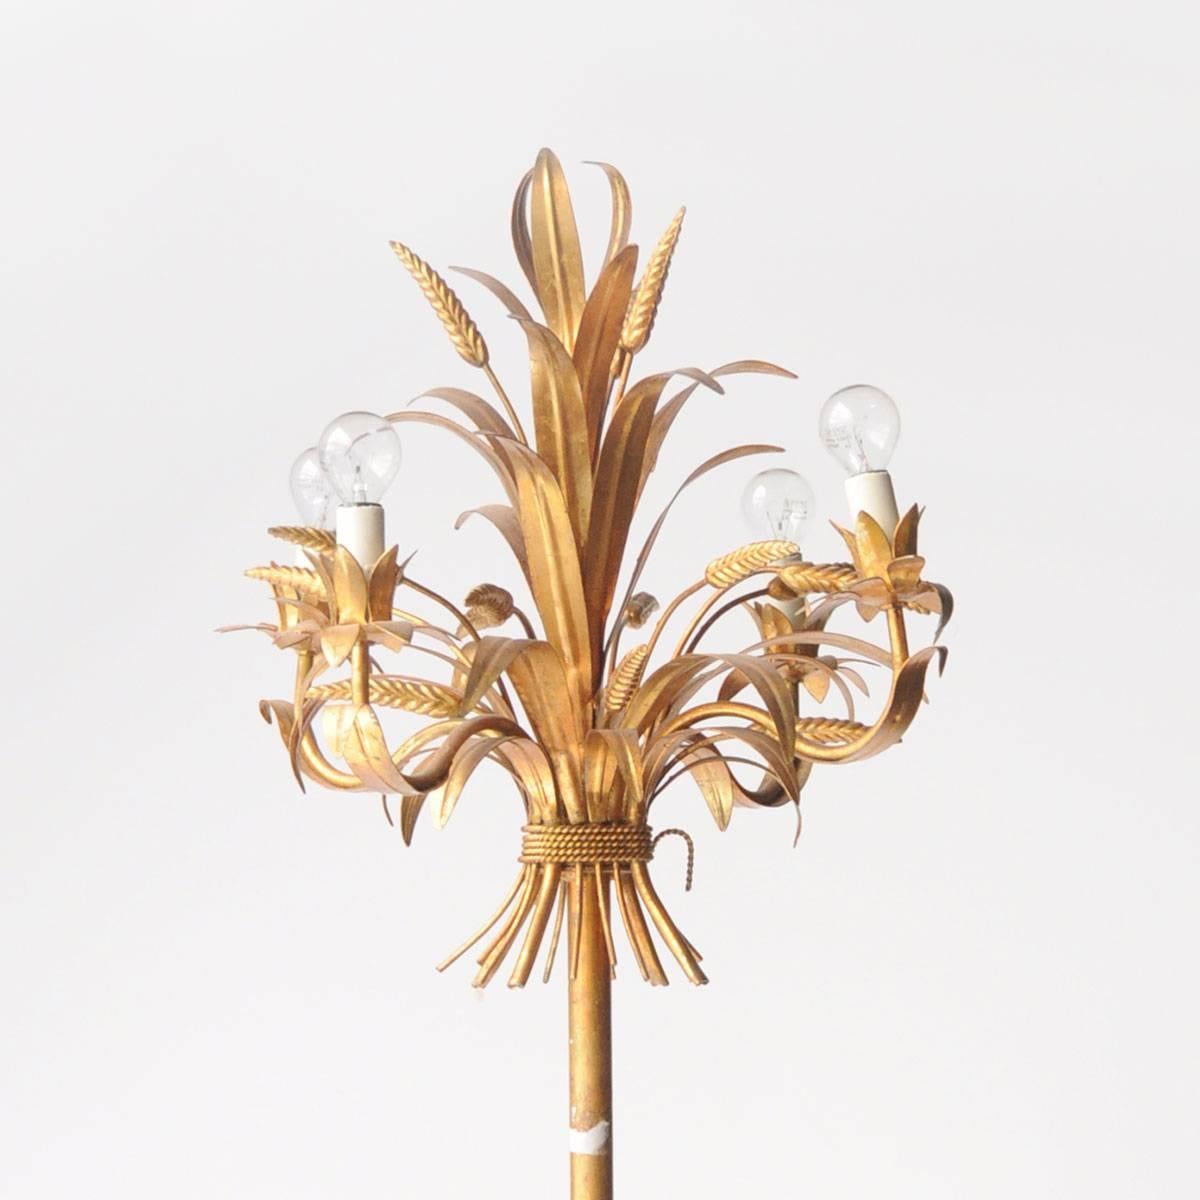 Floor lamp made in metal with a golden patina with vegetal details at the structure and four points of light as a bulb.